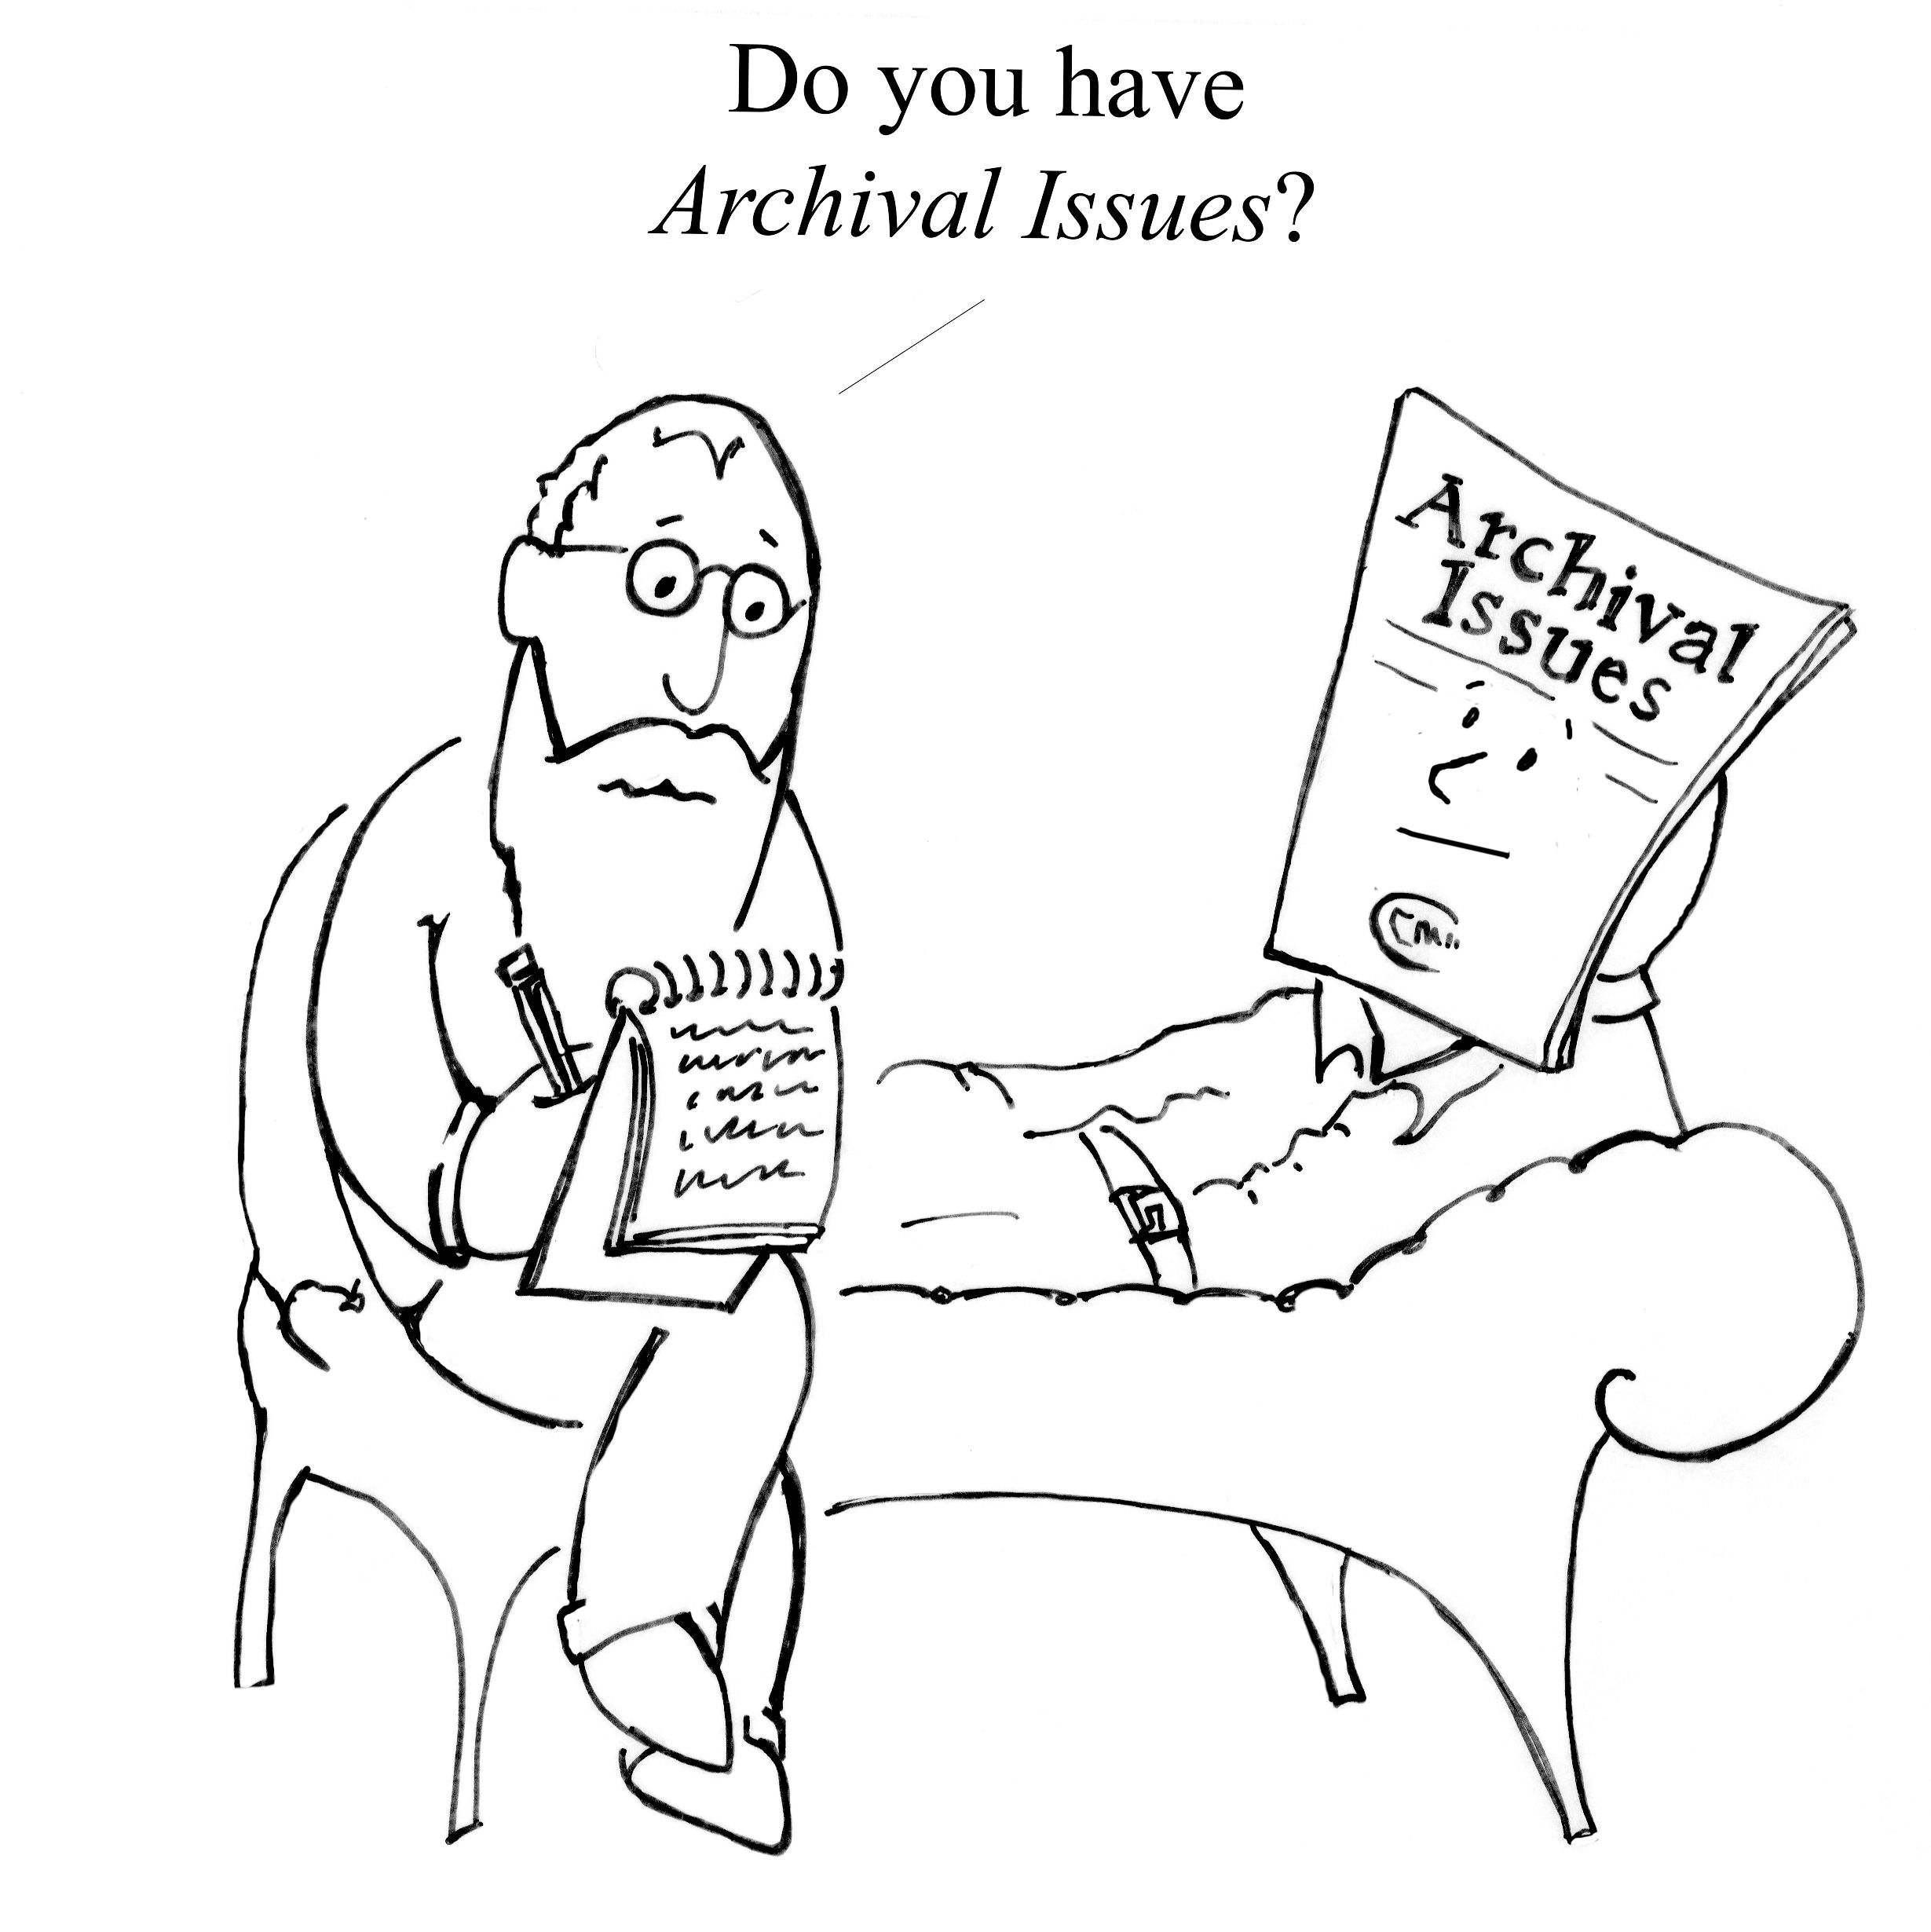 a hand drawn cartoon with a bearded man sitting on a chair taking notes, he asks "do you have archival issues?" while another person, whose face is an Archival Issues issue, looks confused